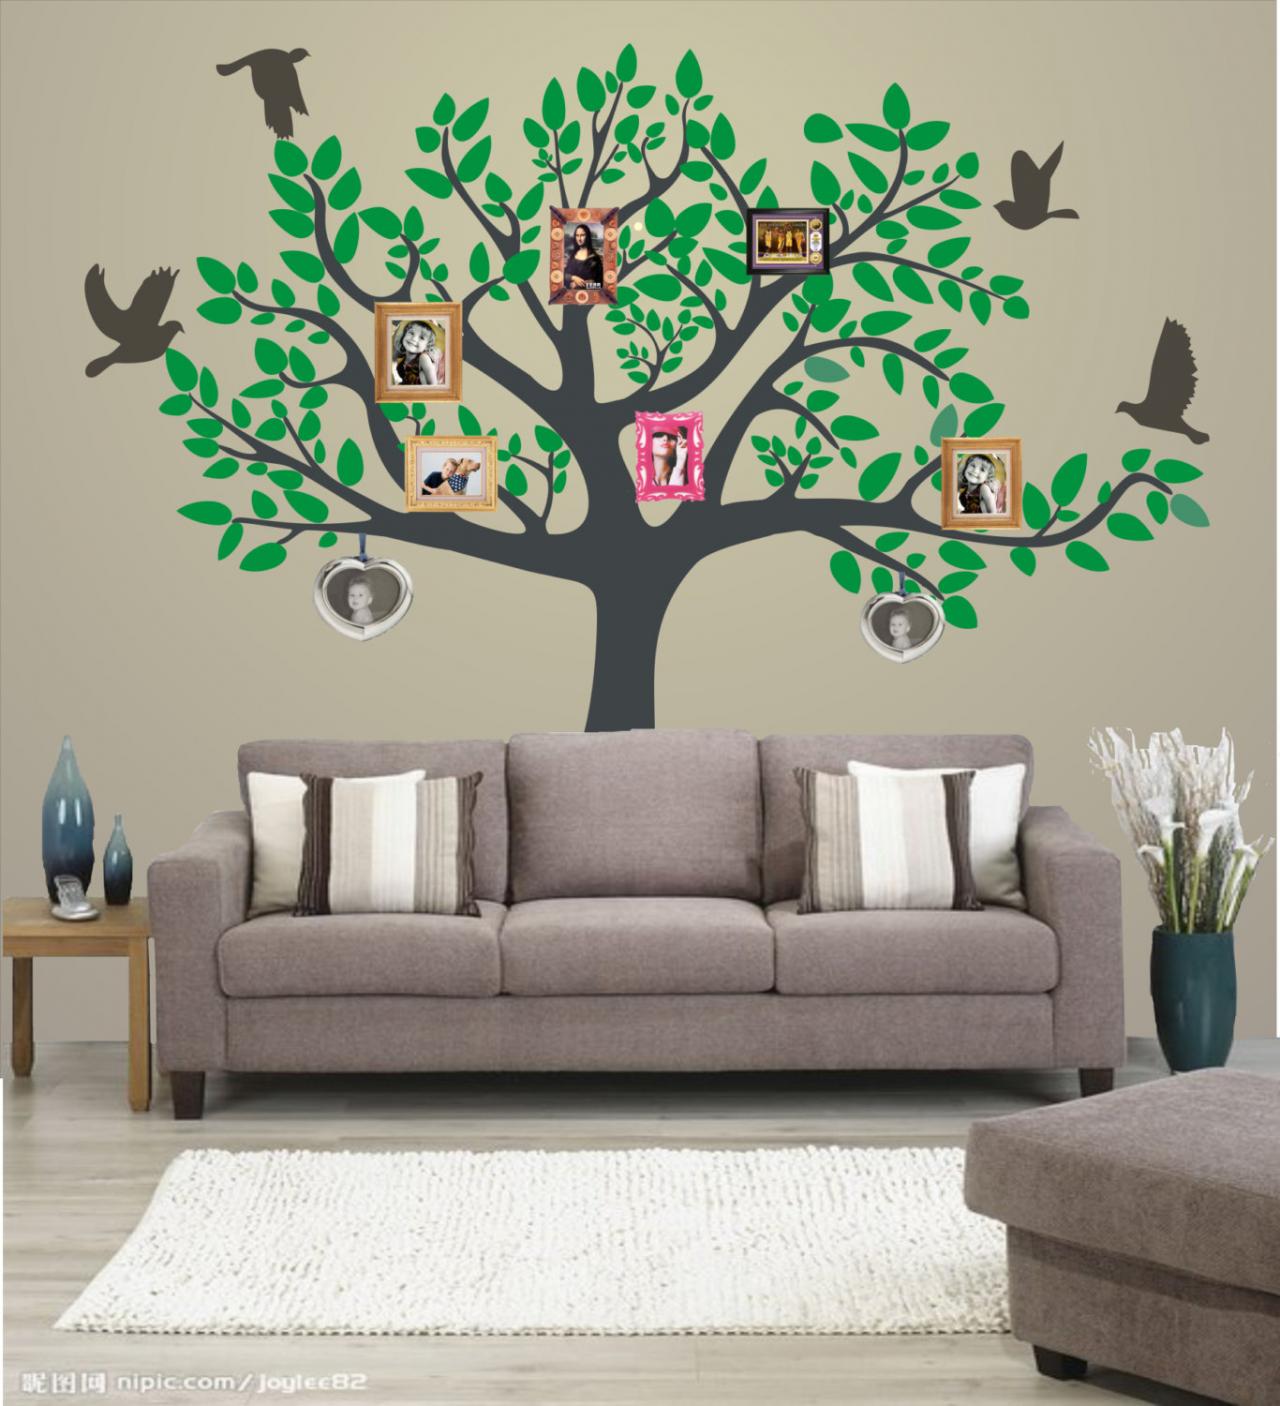 Personalized Family Tree Decal Vinyl Wall Decal Photo Leaf Photos Tree With Birds Decals Home Wall Sticker Stickers Baby Removable R584